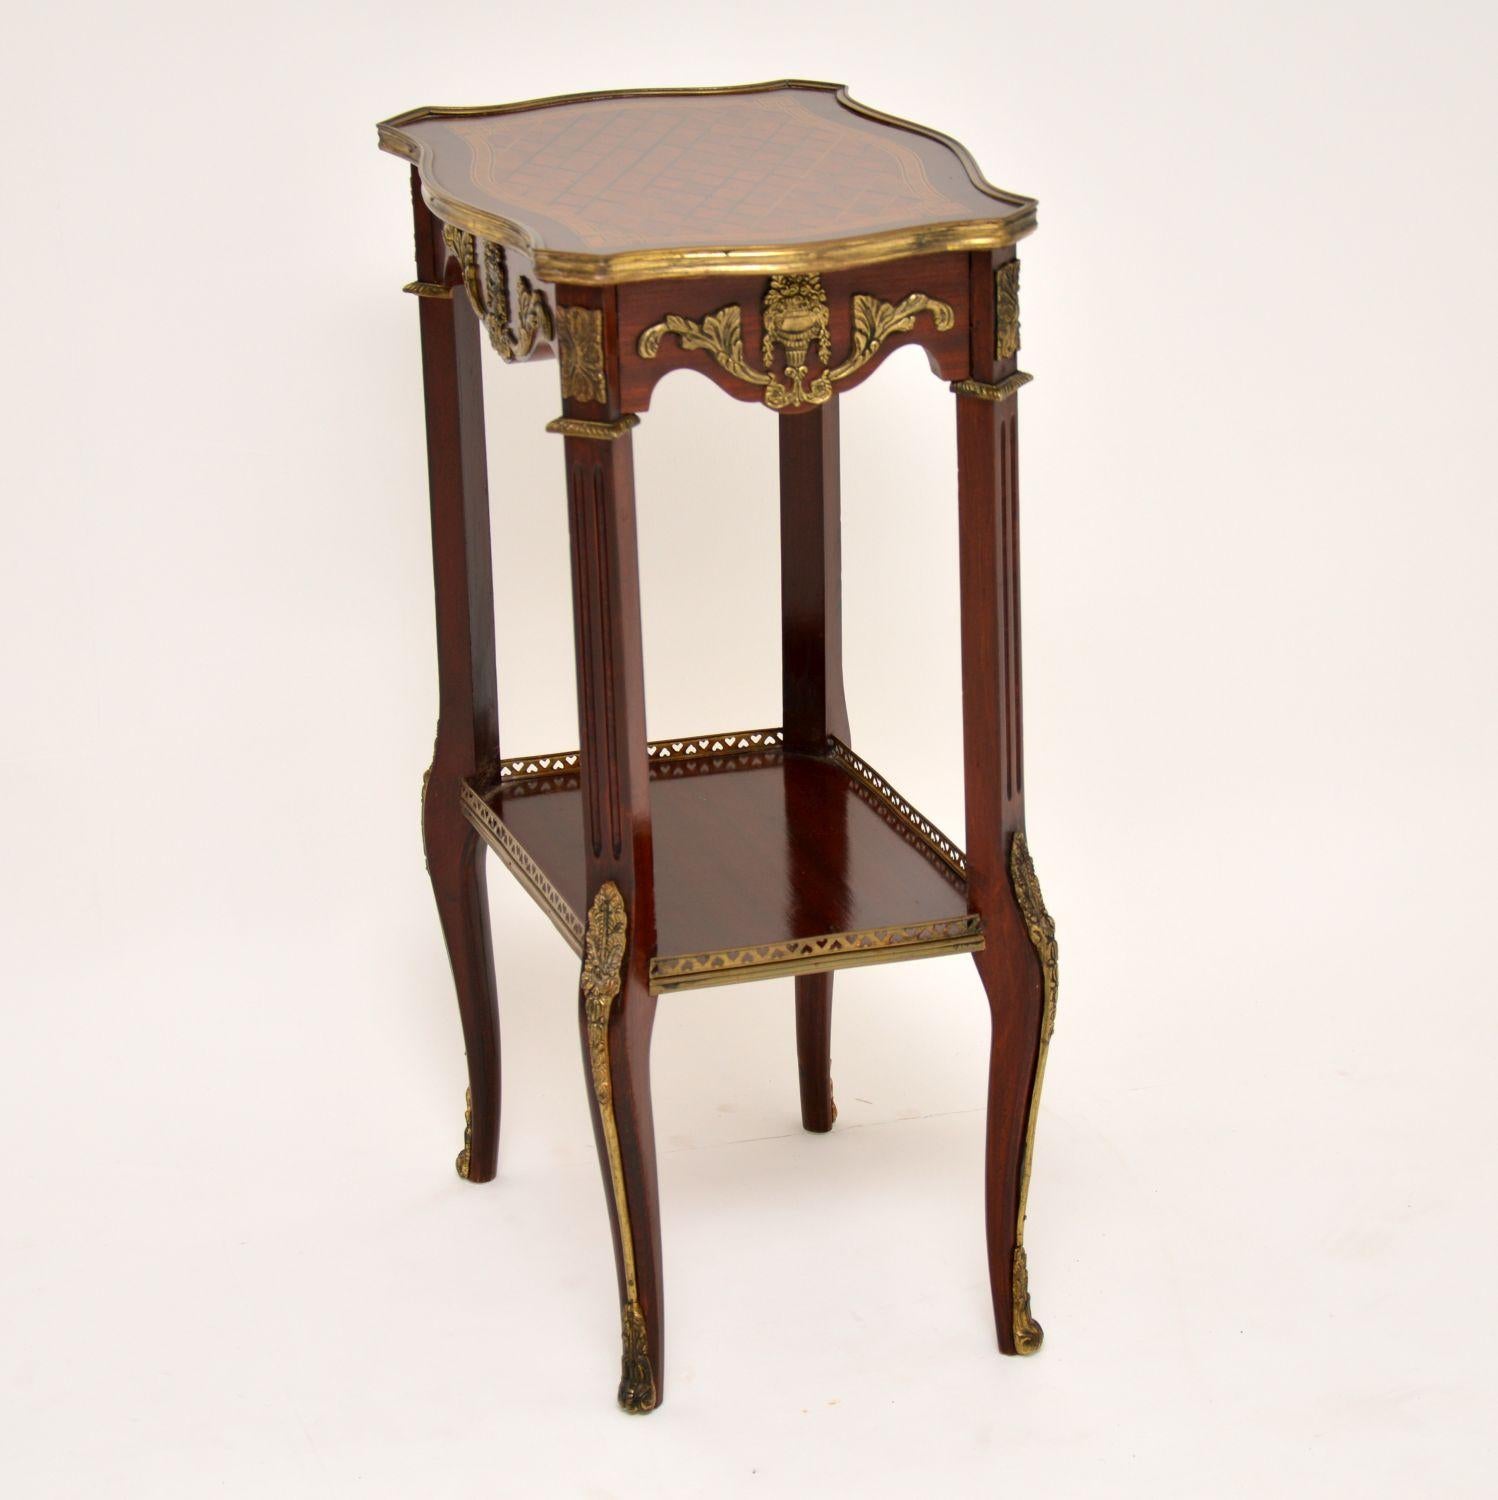 Gilt Antique French Inlaid Parquetry Side Table